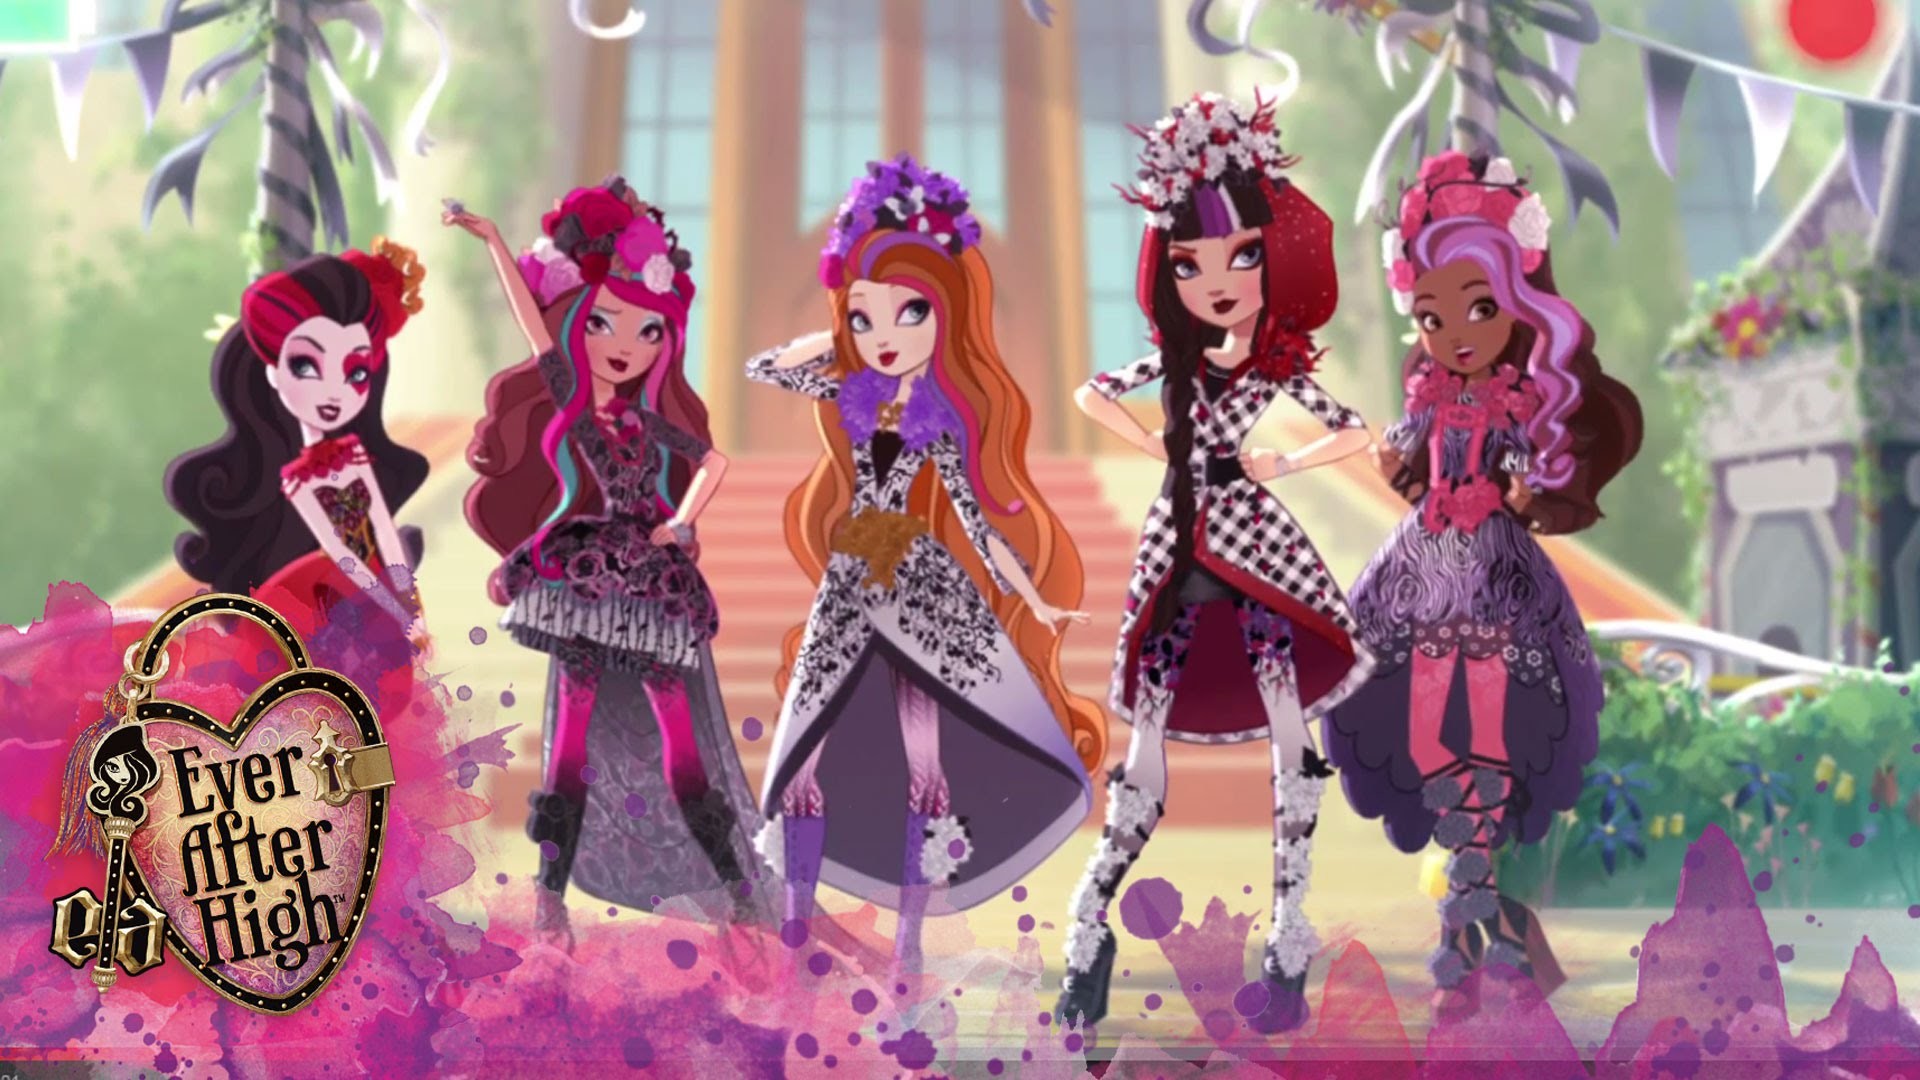 1920x1080 Spring Unsprung: Spellbinding Spring Fashions | Ever After Highâ¢ - YouTube